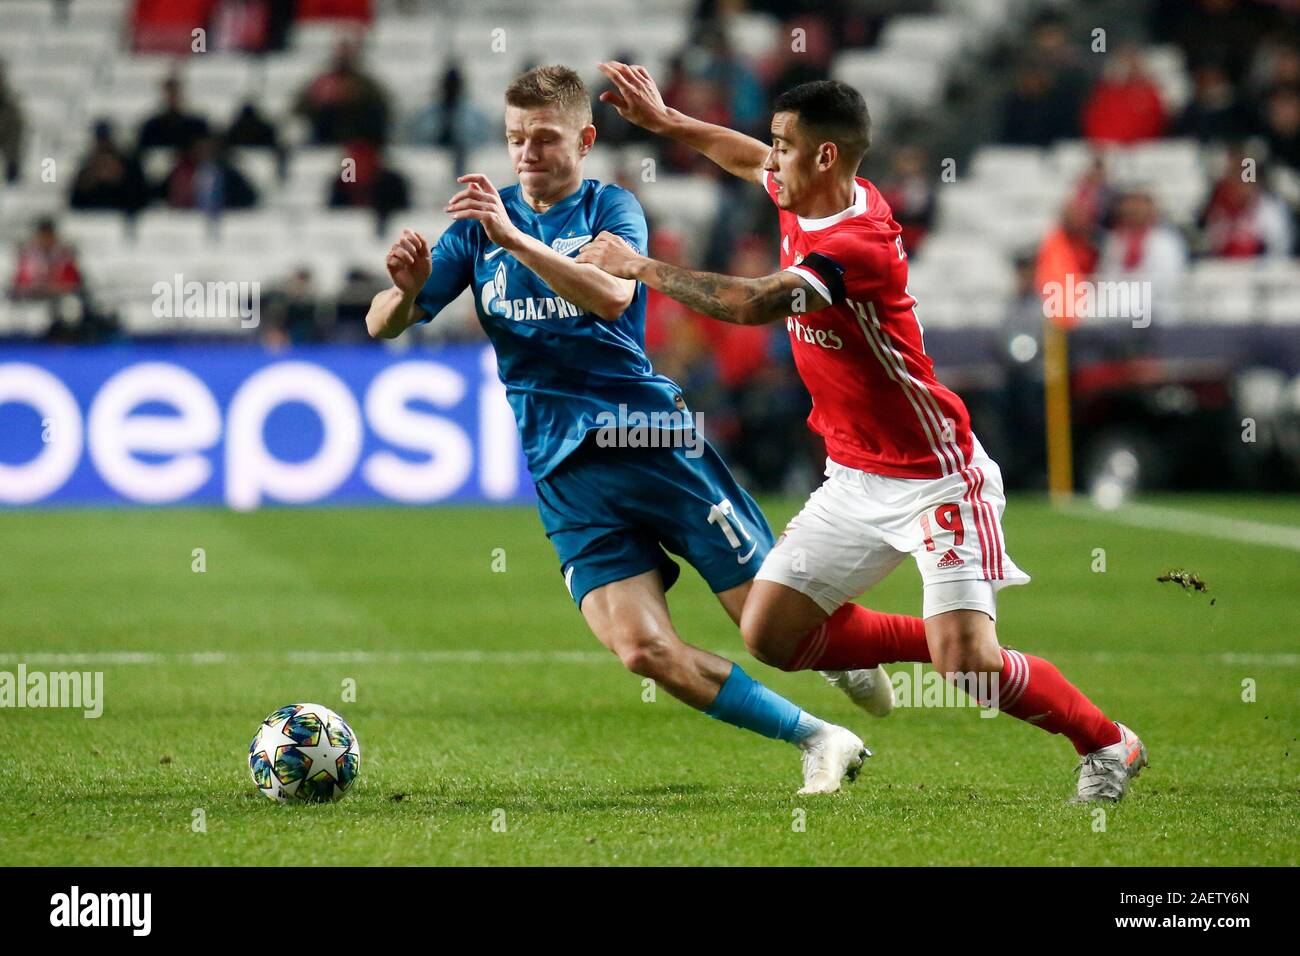 Saint Petersburg, Russia. 11th Dec, 2019. Chiquinho (Francisco Leonel Lima Silva Machado) (R) of Benfica and Oleg Shatov (L) of Zenit are seen in action during the UEFA Champions League group G match between SL Benfica Lisbon and Zenit at Gazprom Arena in St. Petersburg.(Final score; SL Benfica Lisbon 3:0 Zenit) Credit: SOPA Images Limited/Alamy Live News Stock Photo